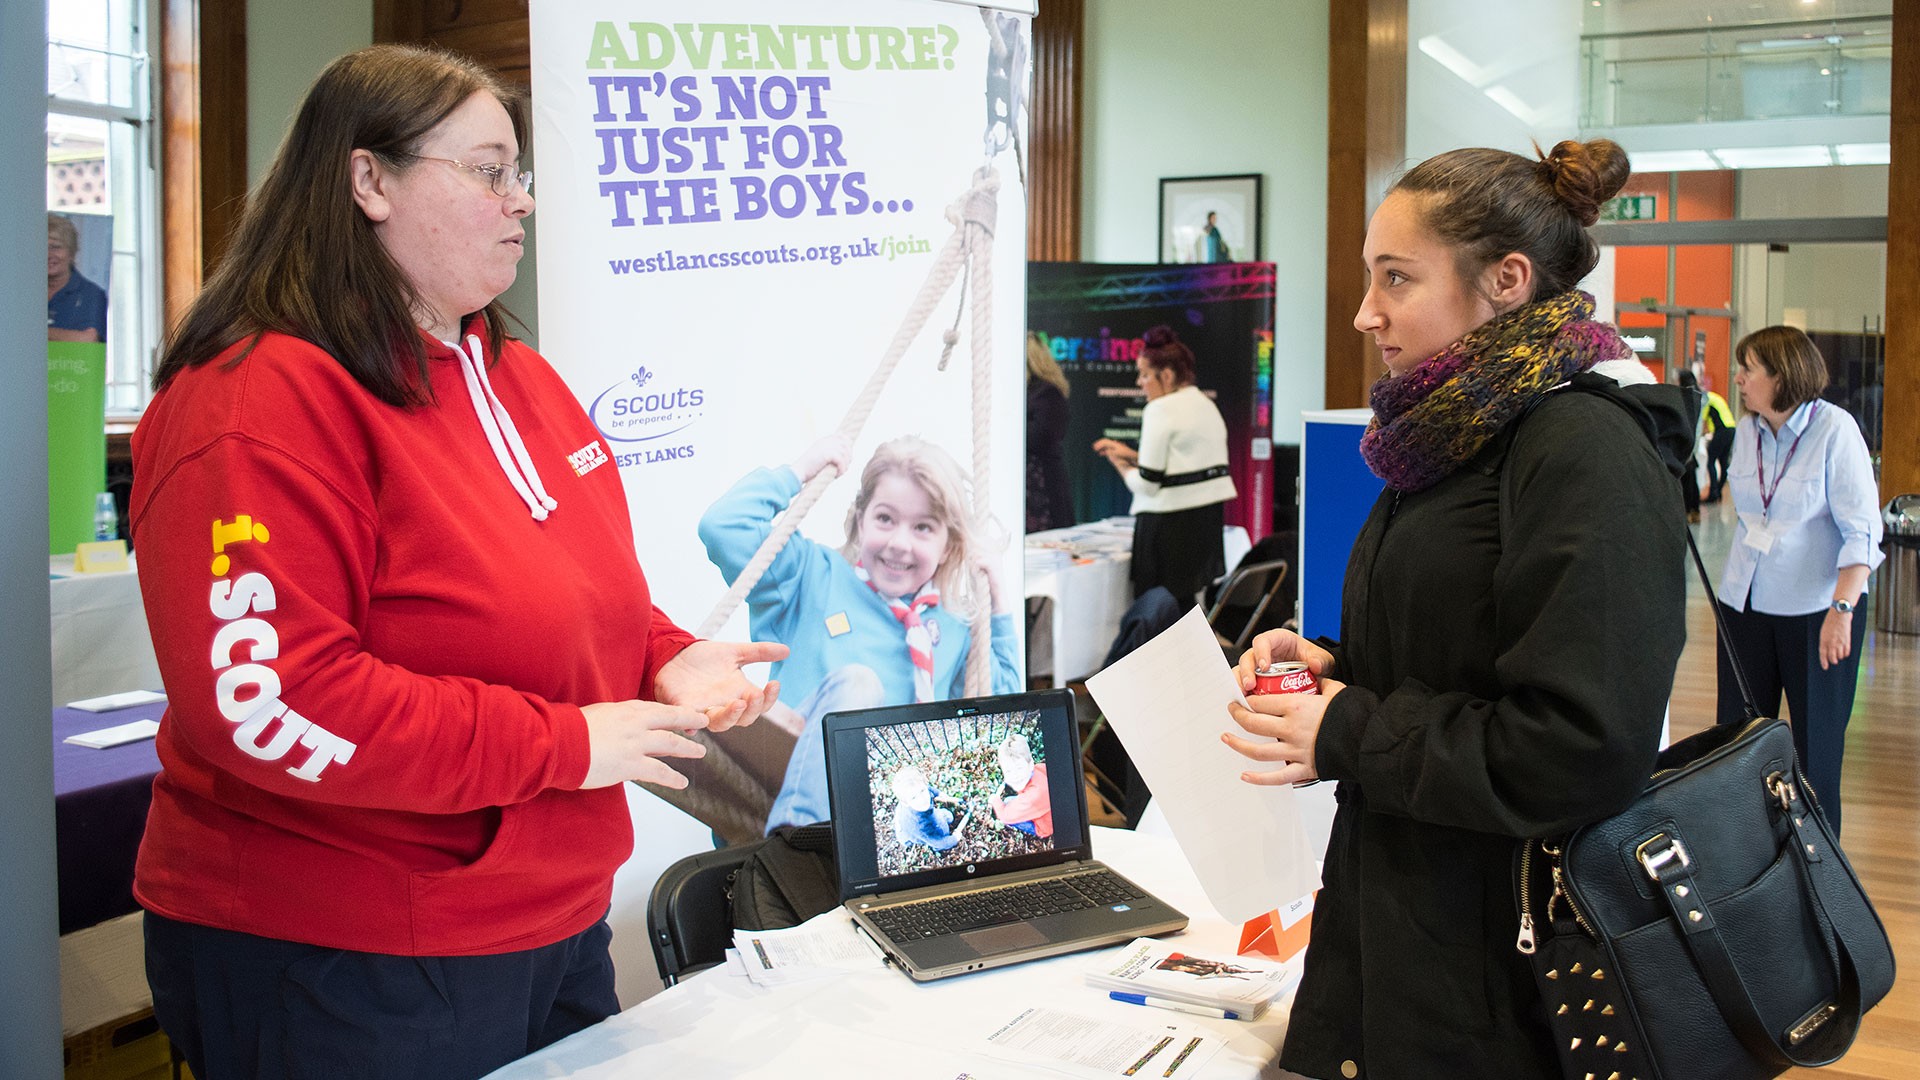 An image of two people talking at a desk at a careers fair.